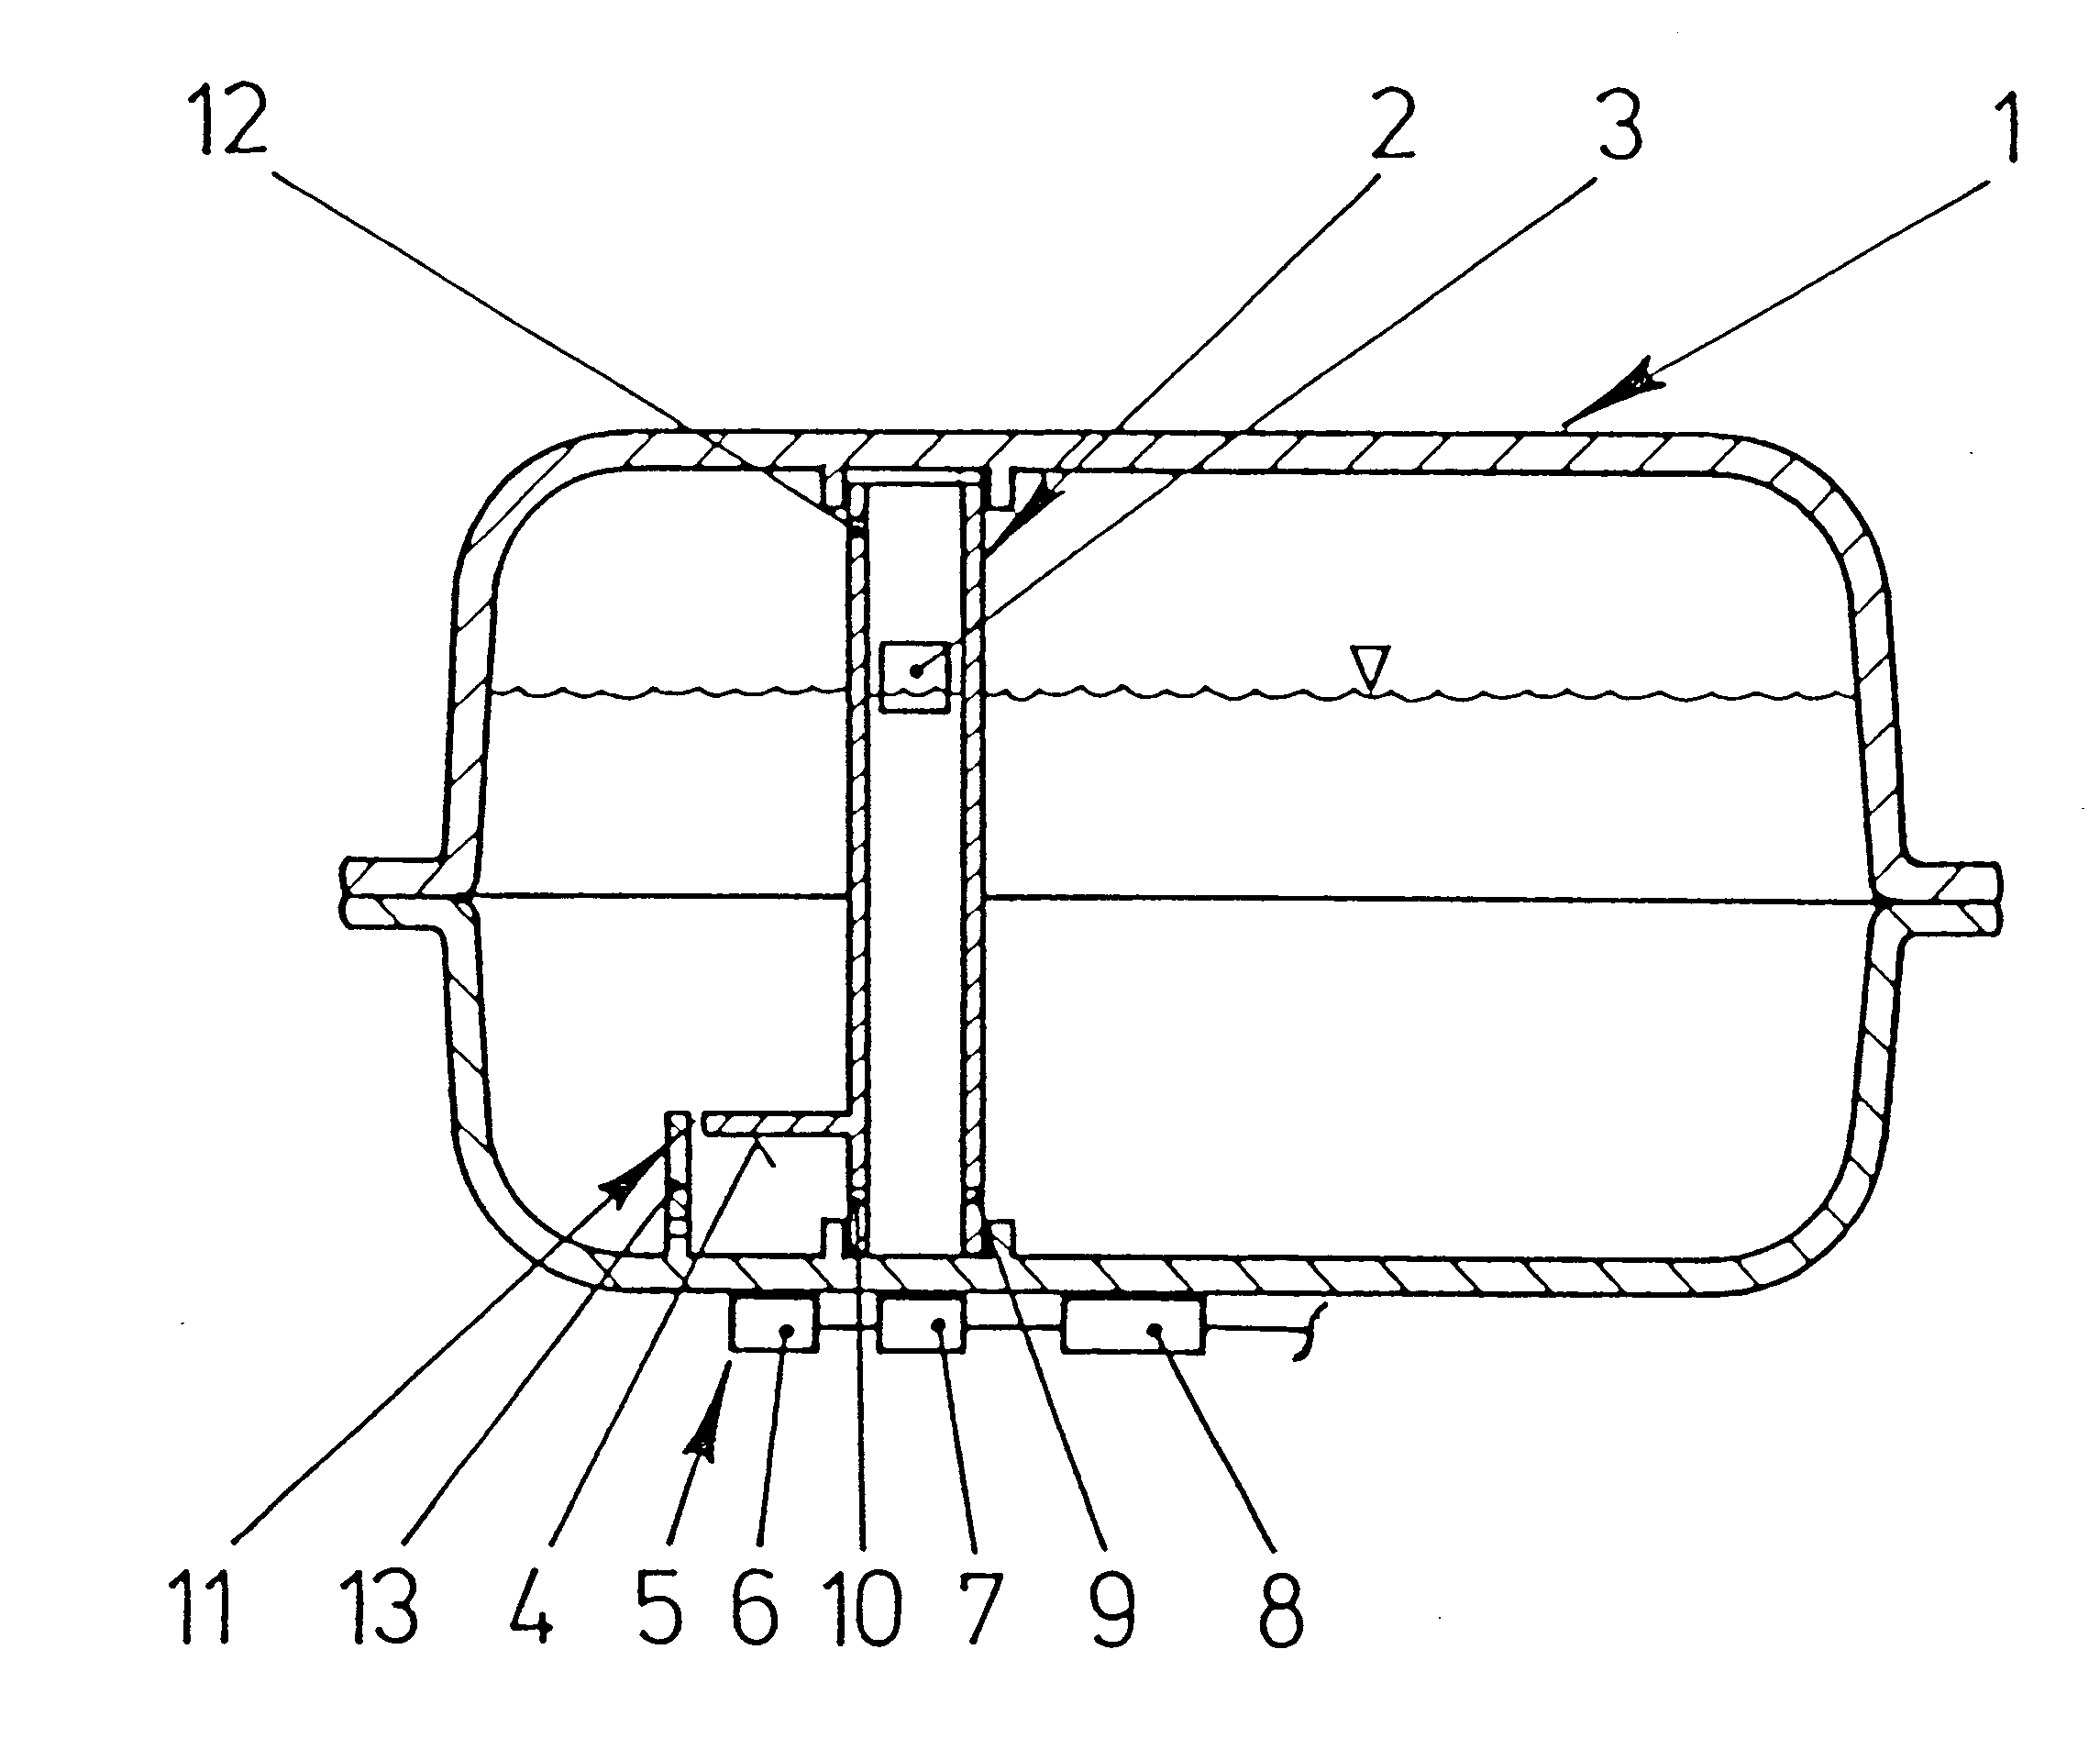 Device for measuring a fill level of a liquid in a container